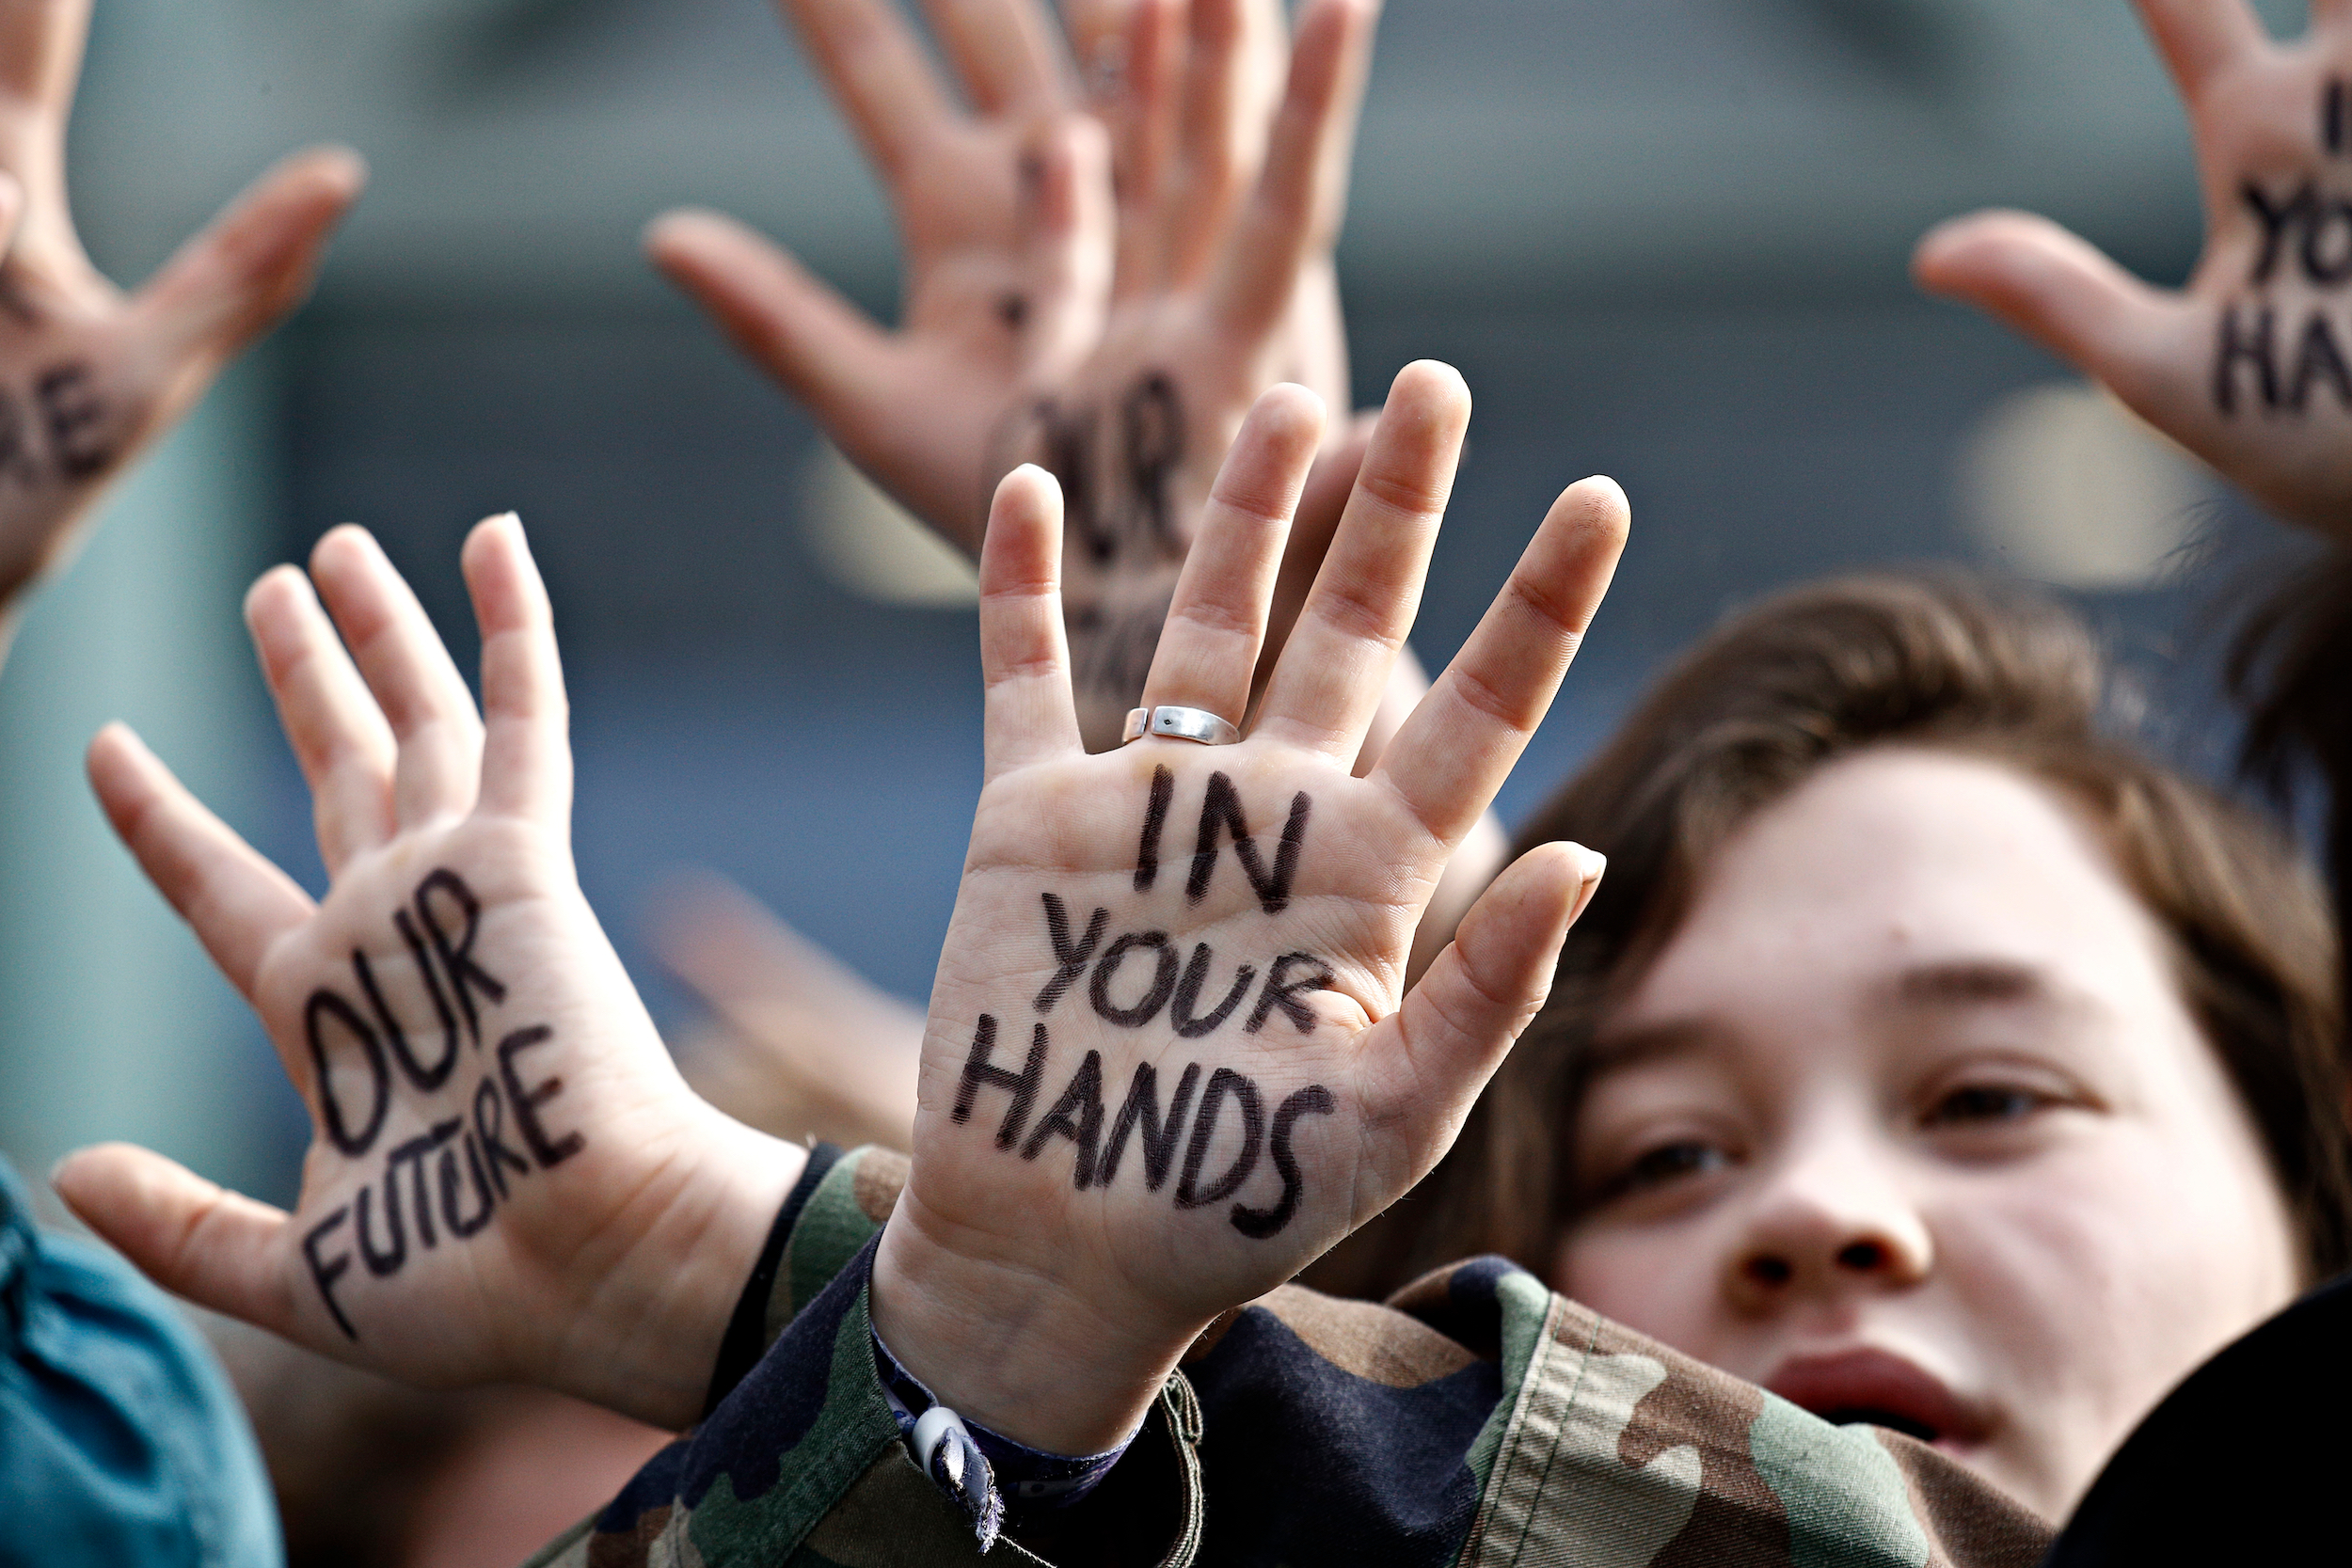 Students at a climate protest with "Our Future is in Your Hands" written on their hands